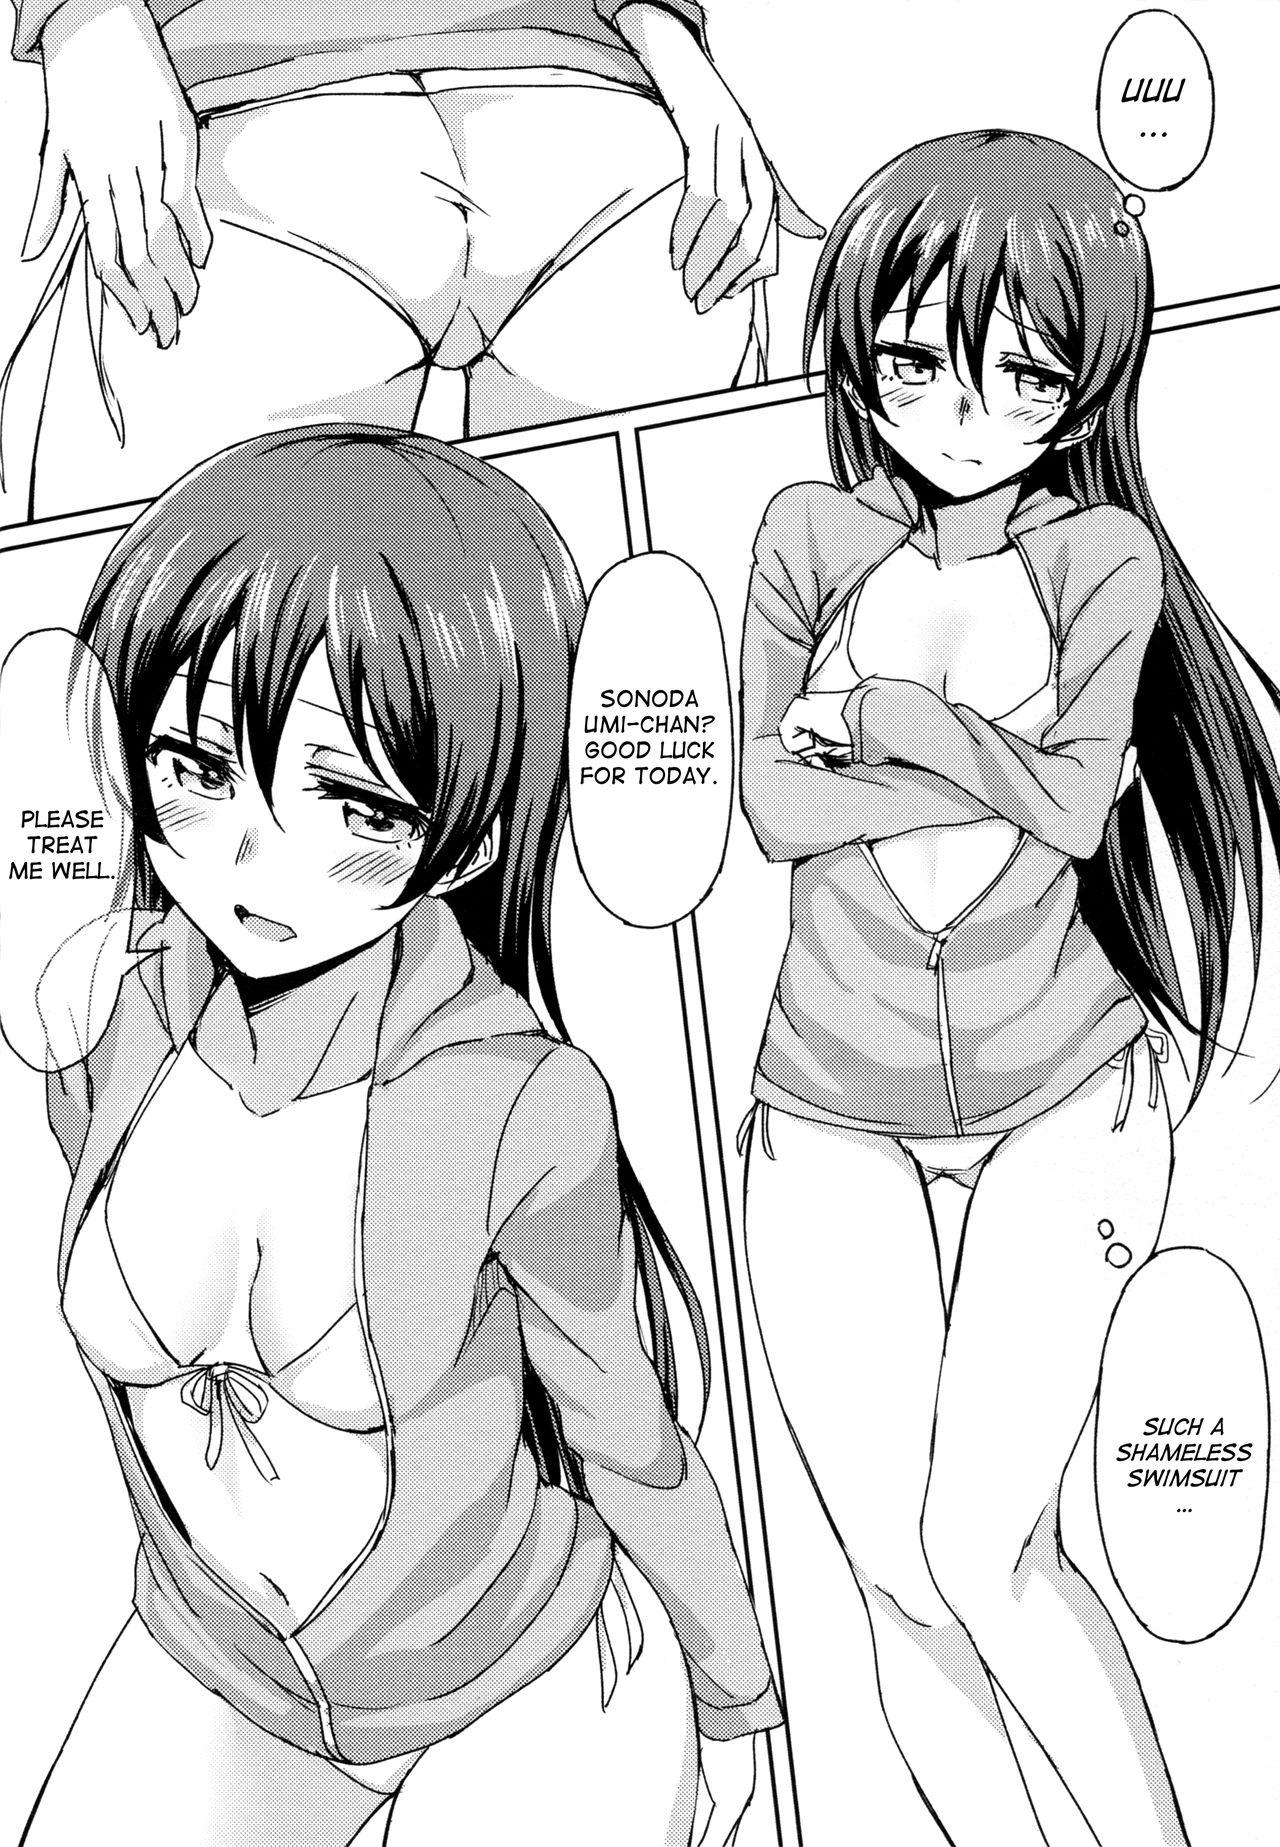 Best Blowjobs Hah,Wrench This! - Love live Lick - Page 6